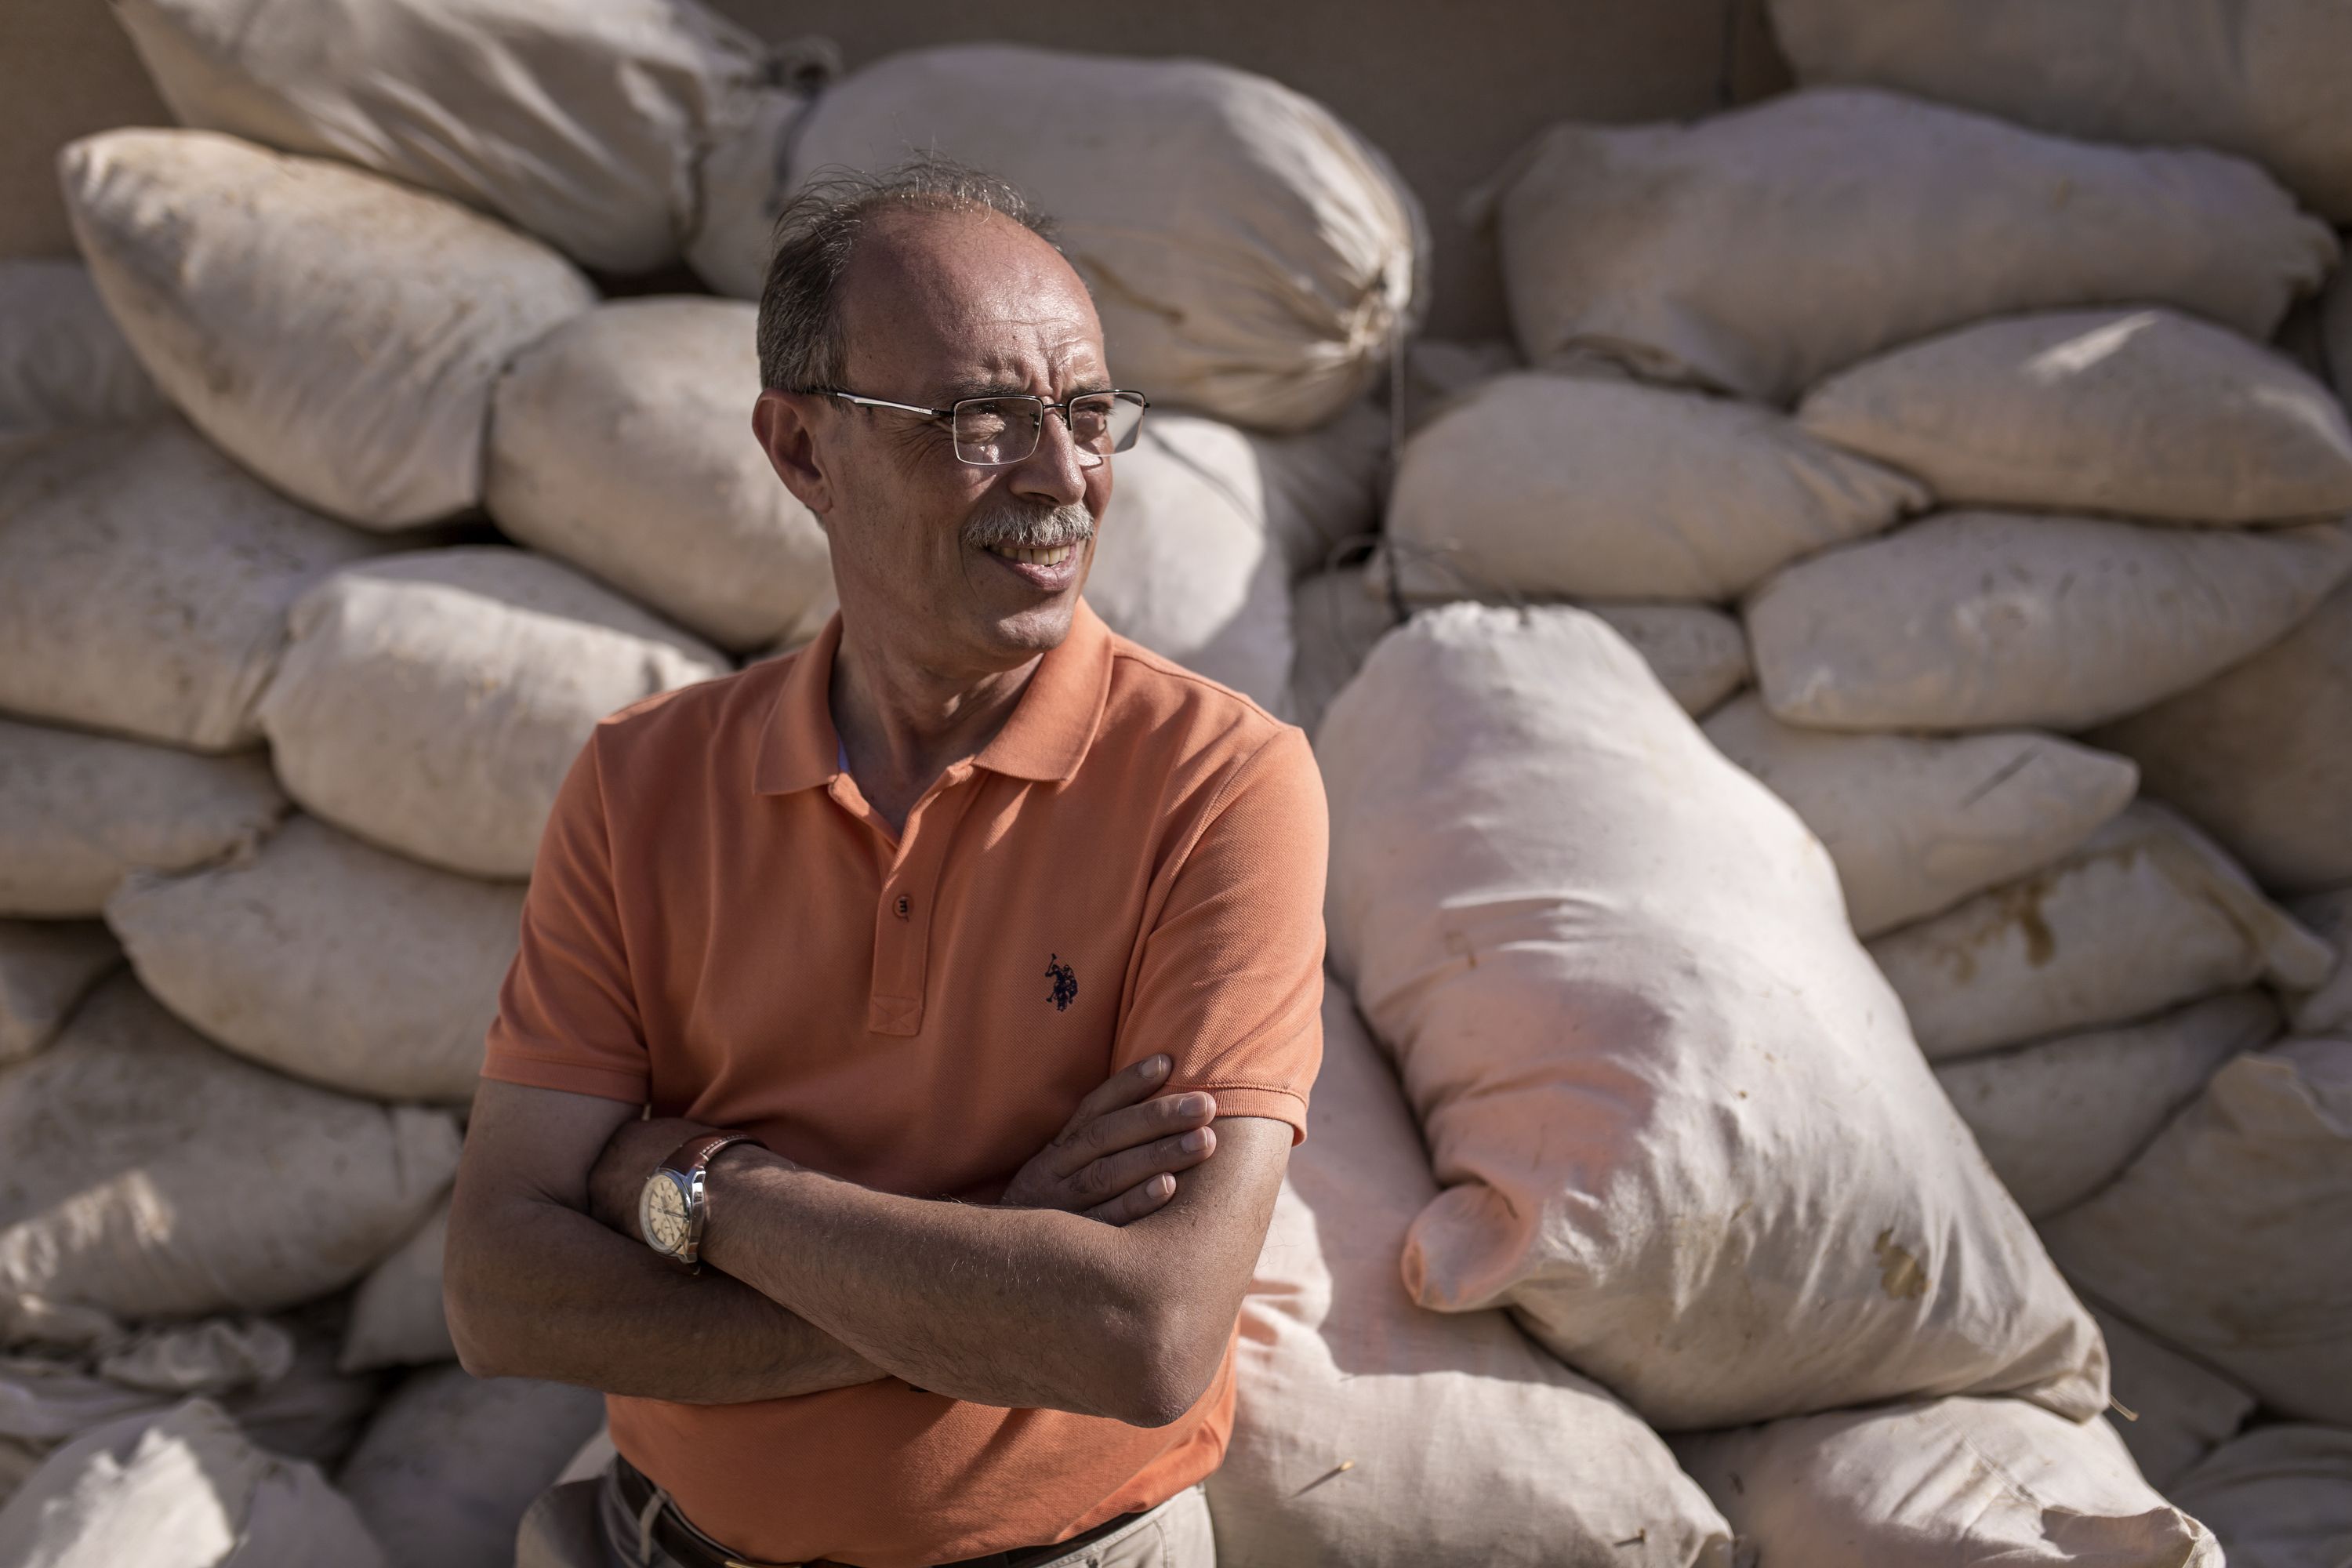  ICARDA associate scientist Ali Shehadeh tried to negotiate with rebel groups to maintain ICARDA's seed collection in Syria after the war broke out. Image by Jacob Russell. Lebanon, 2016. 